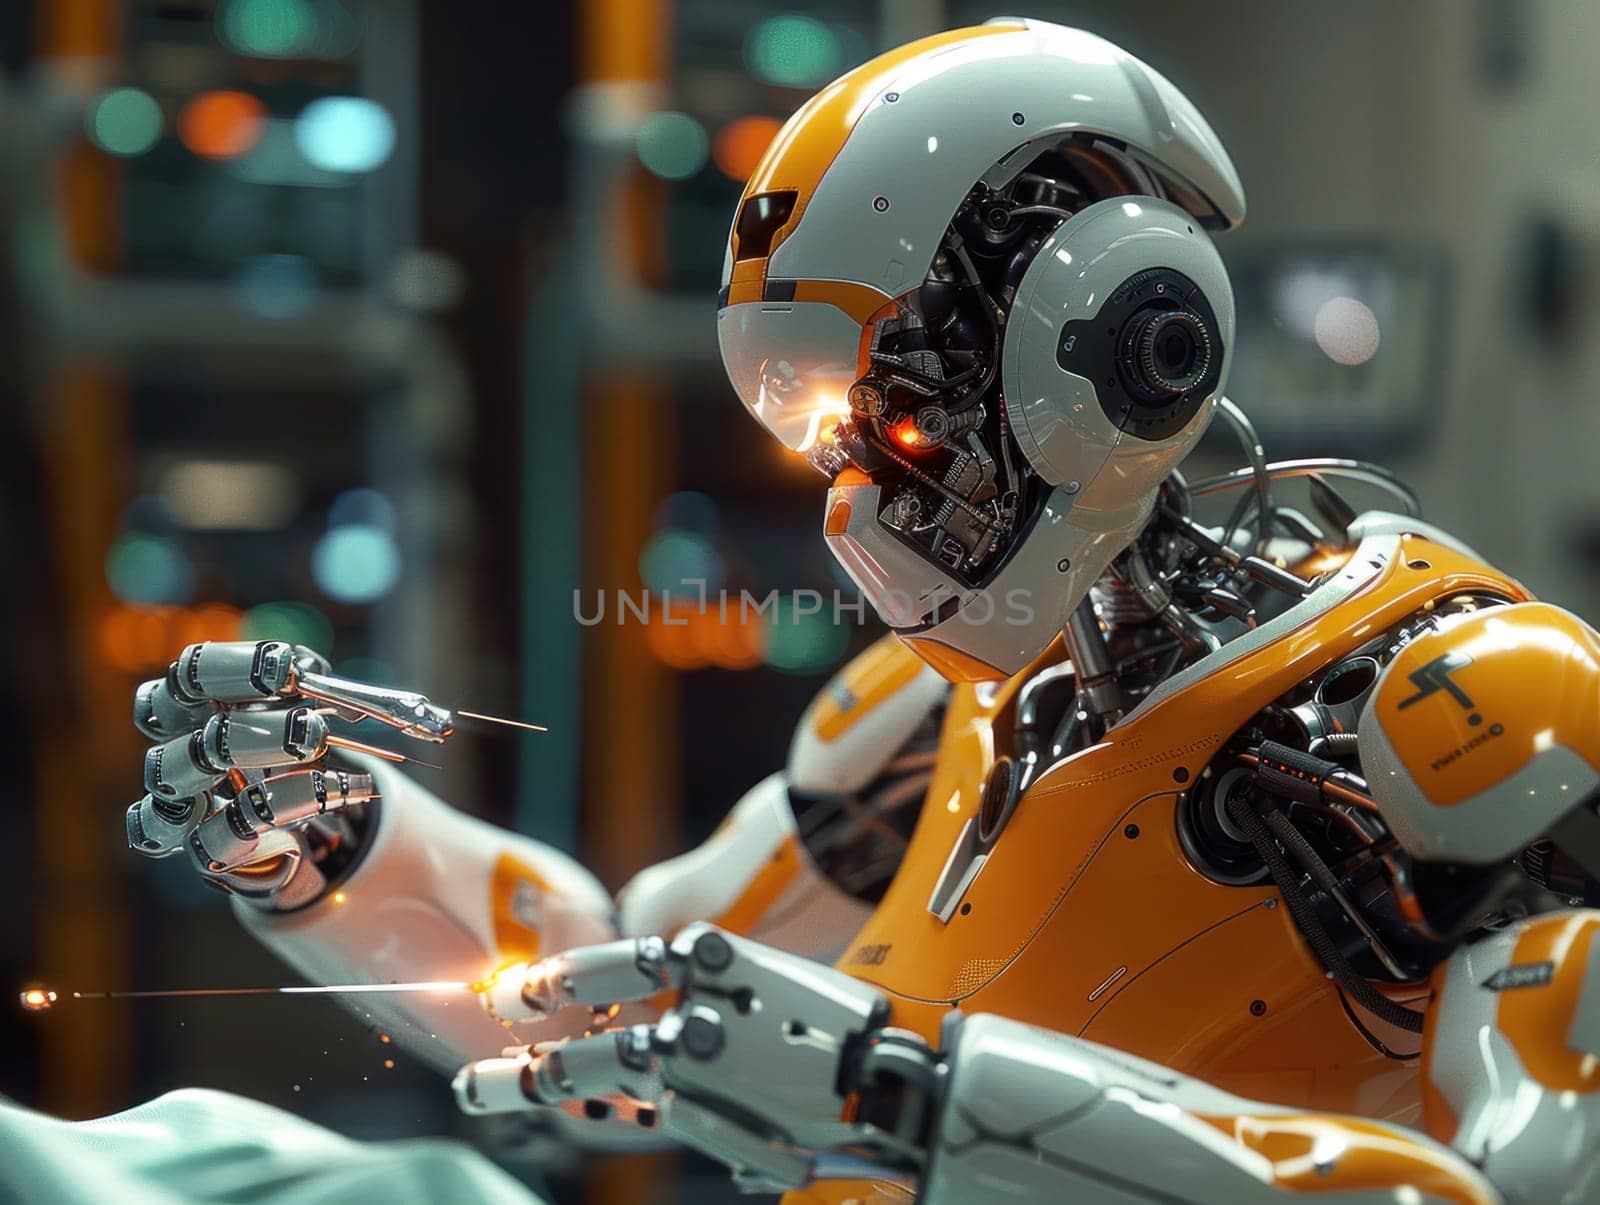 A robot is depicted holding an object in its hand, showcasing advanced technology and robotic capabilities.